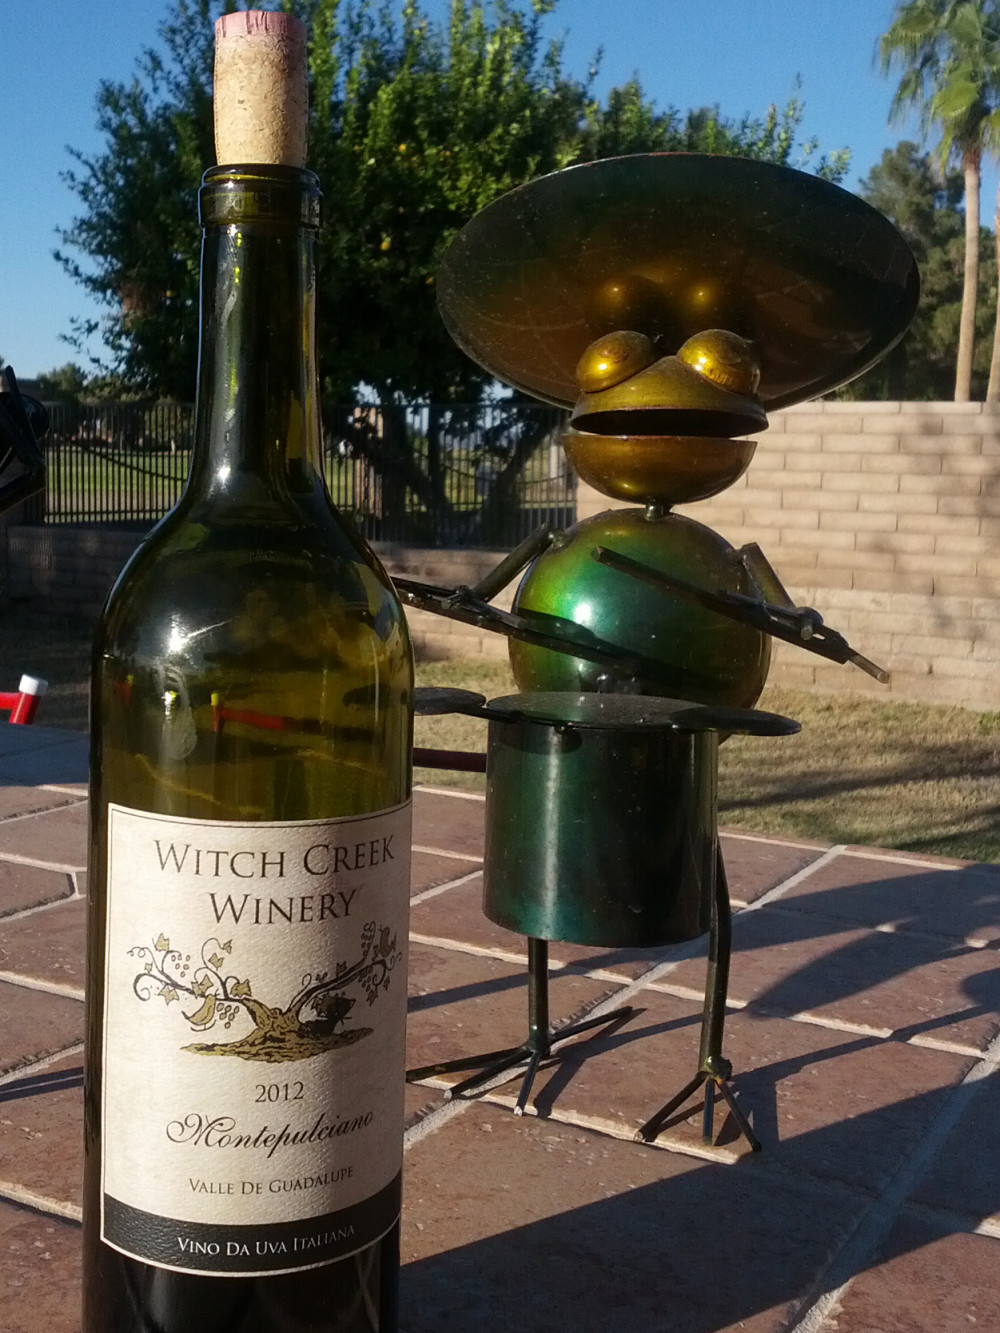 Witch Creek Winery 2012 Montepulciano